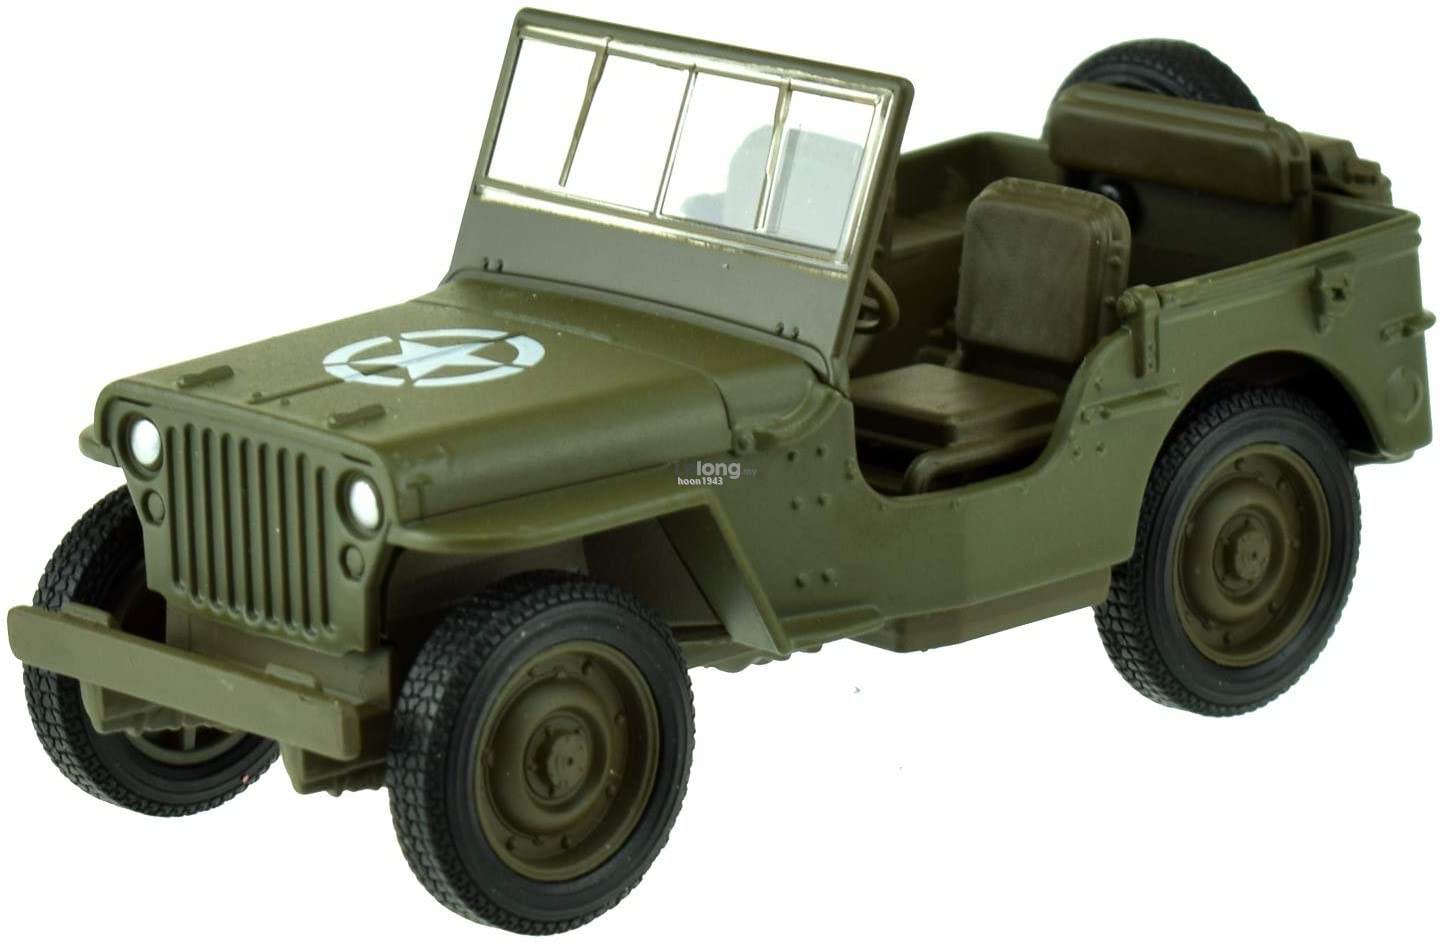 1941 Willys MB Jeep 4x4 military truck